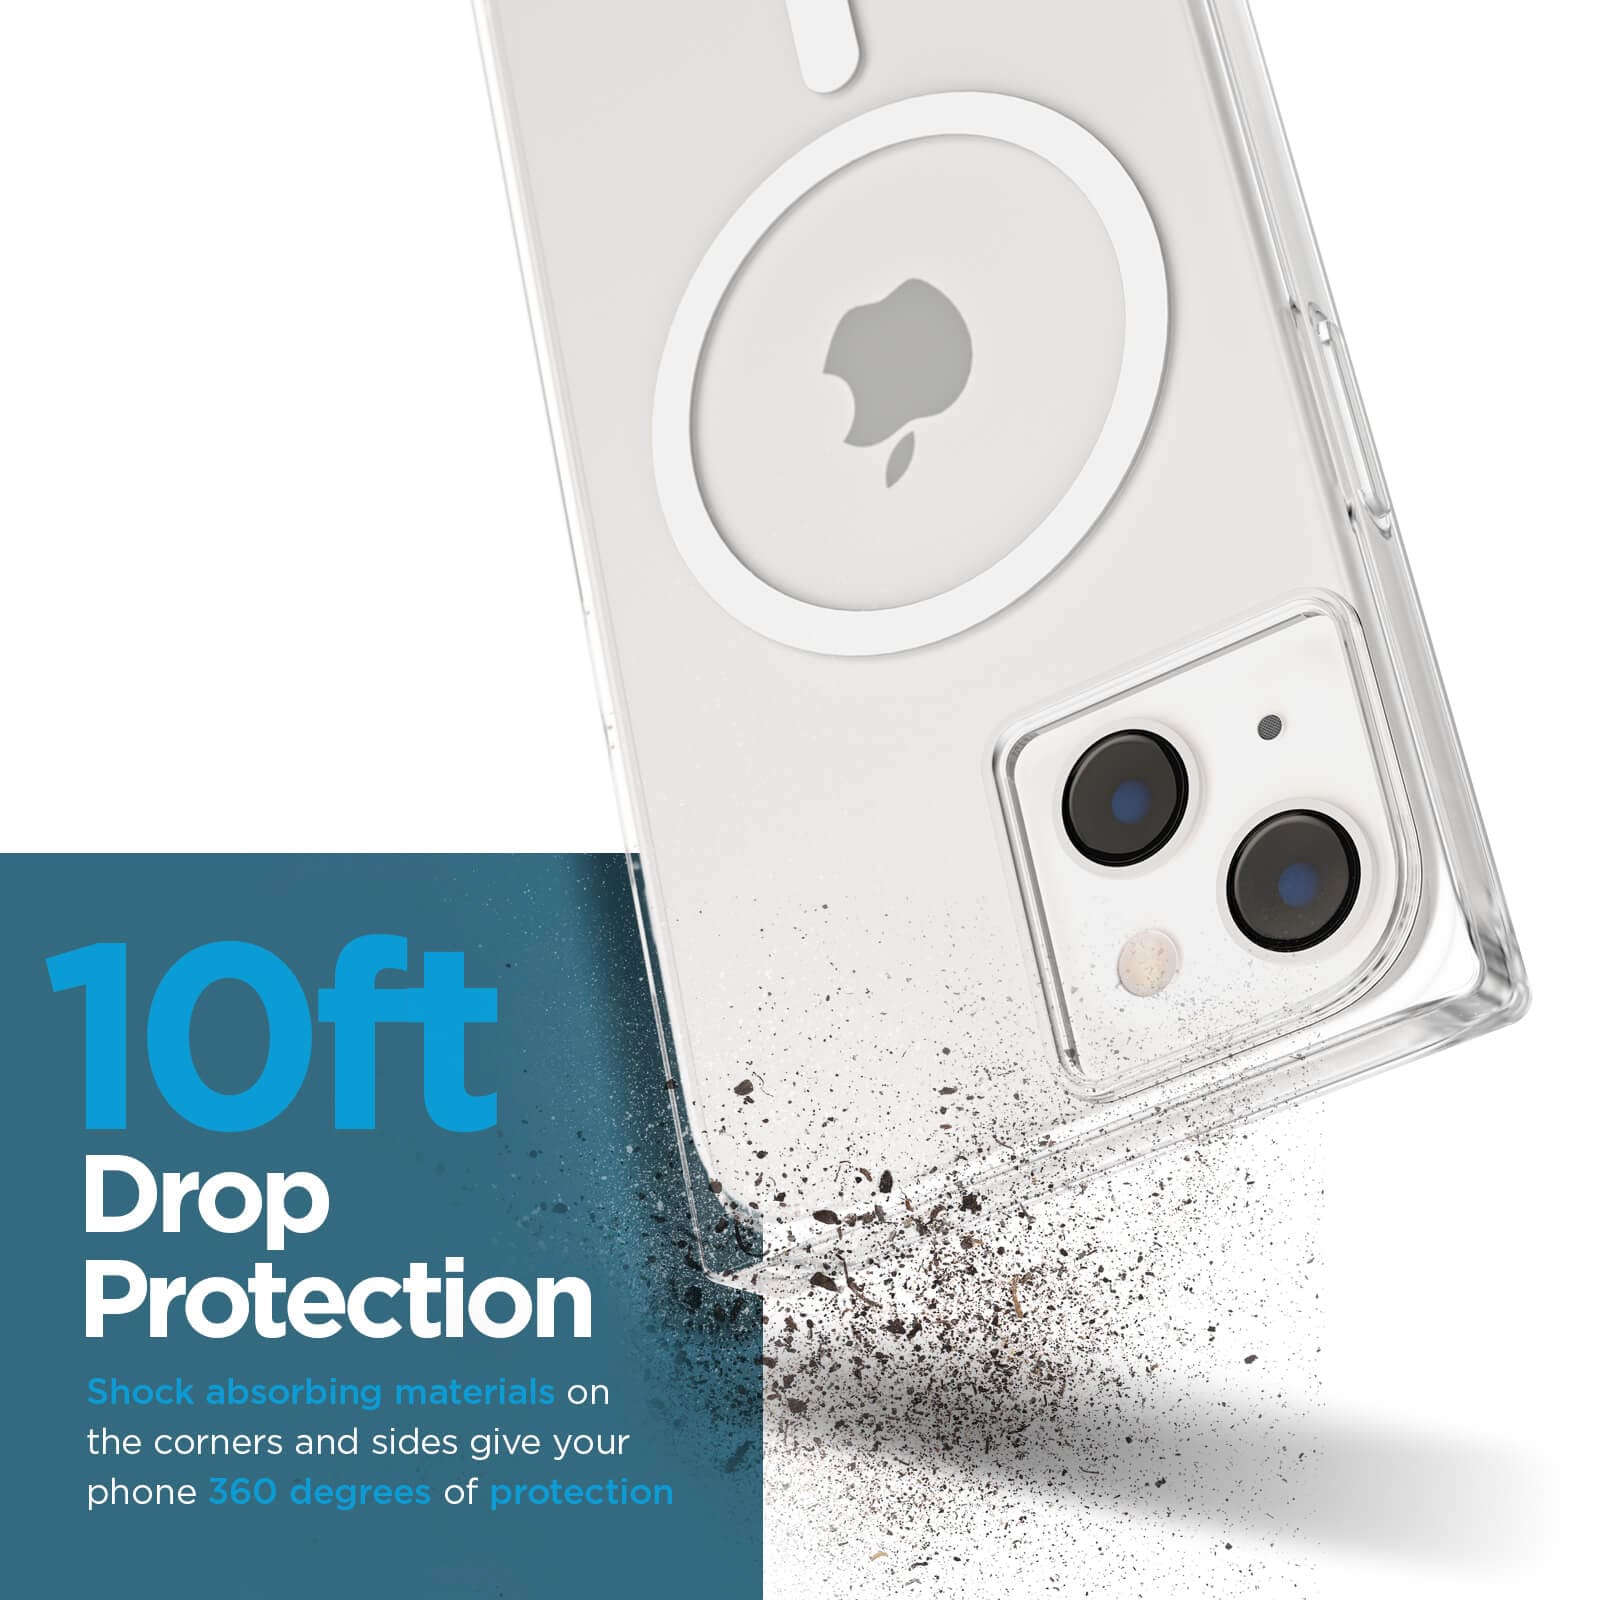 10ft drop protection shock absorbing materials on the corners and sides give your phone 360 degrees of protection. color::Clear